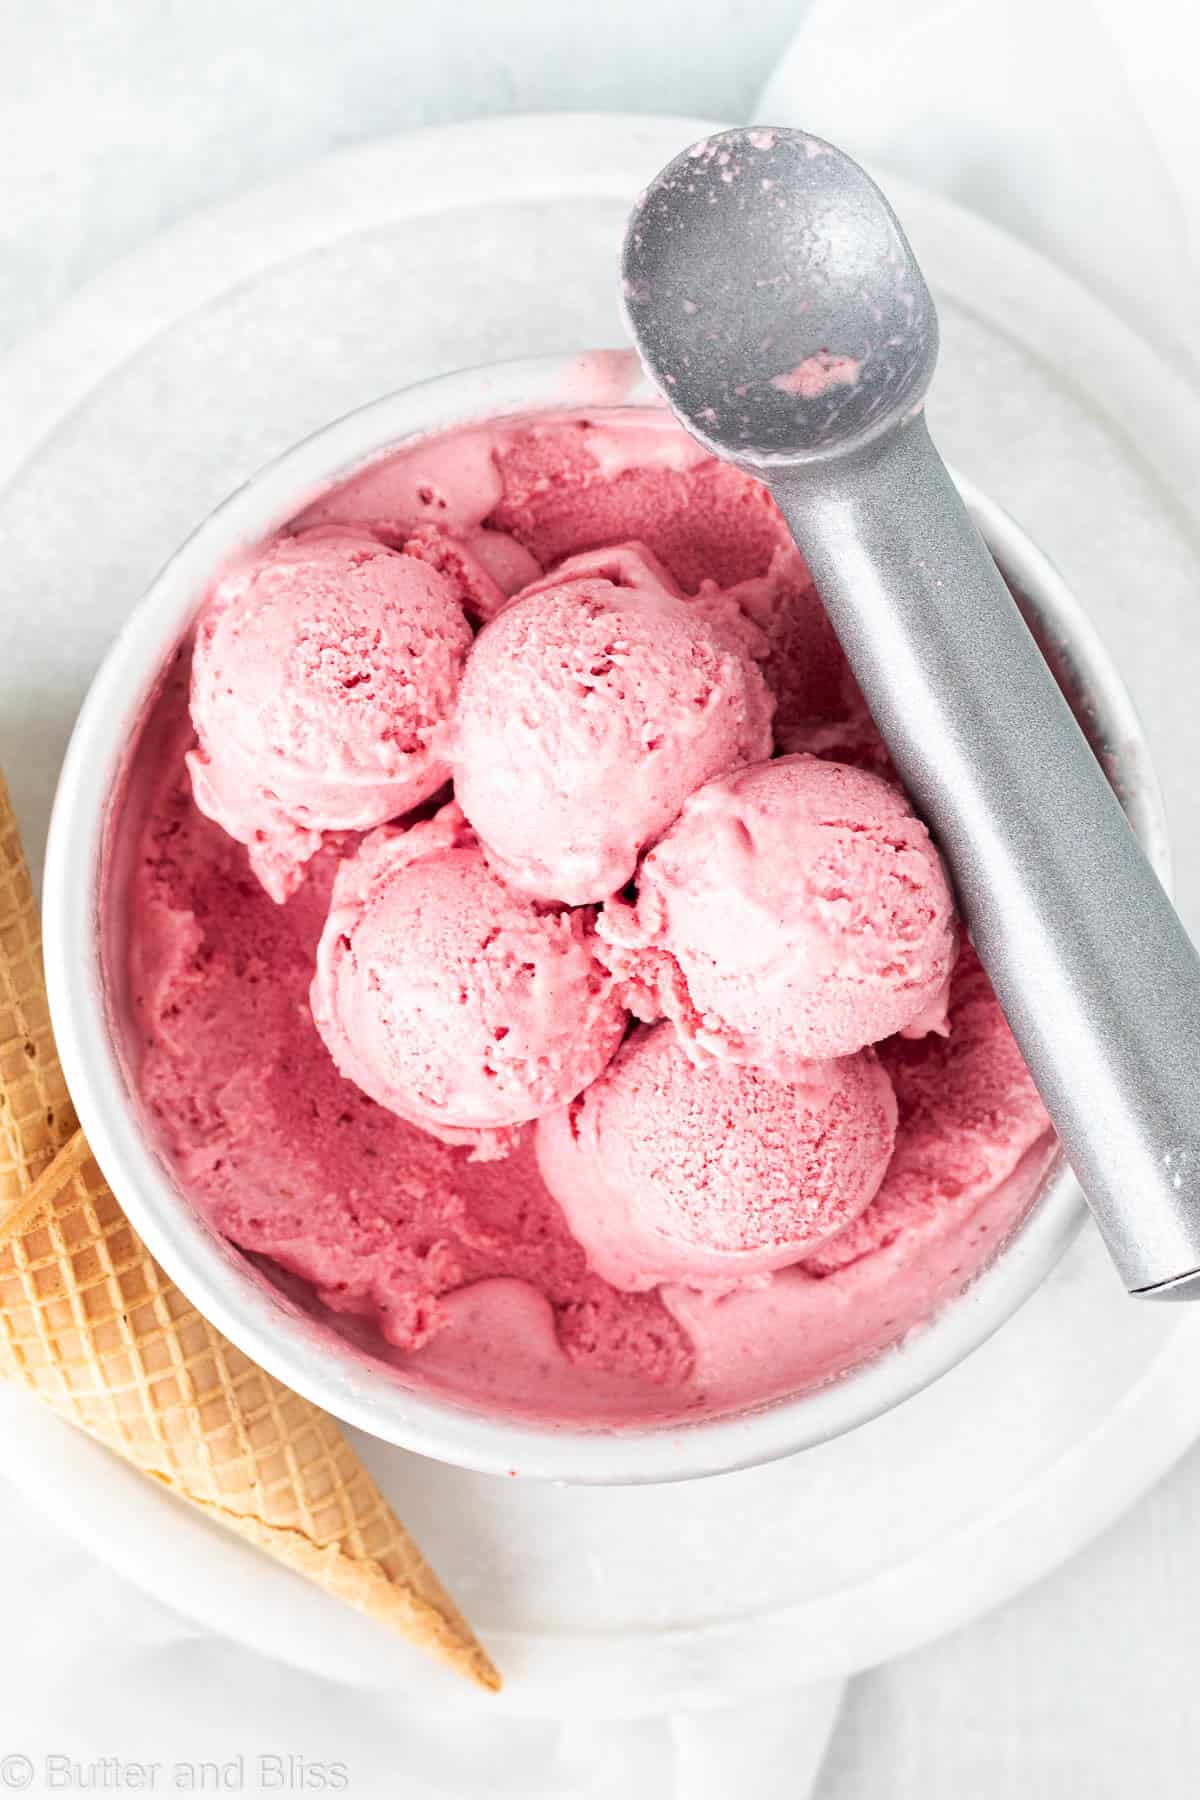 Scoops of strawberry dairy free ice cream in a round cake pan